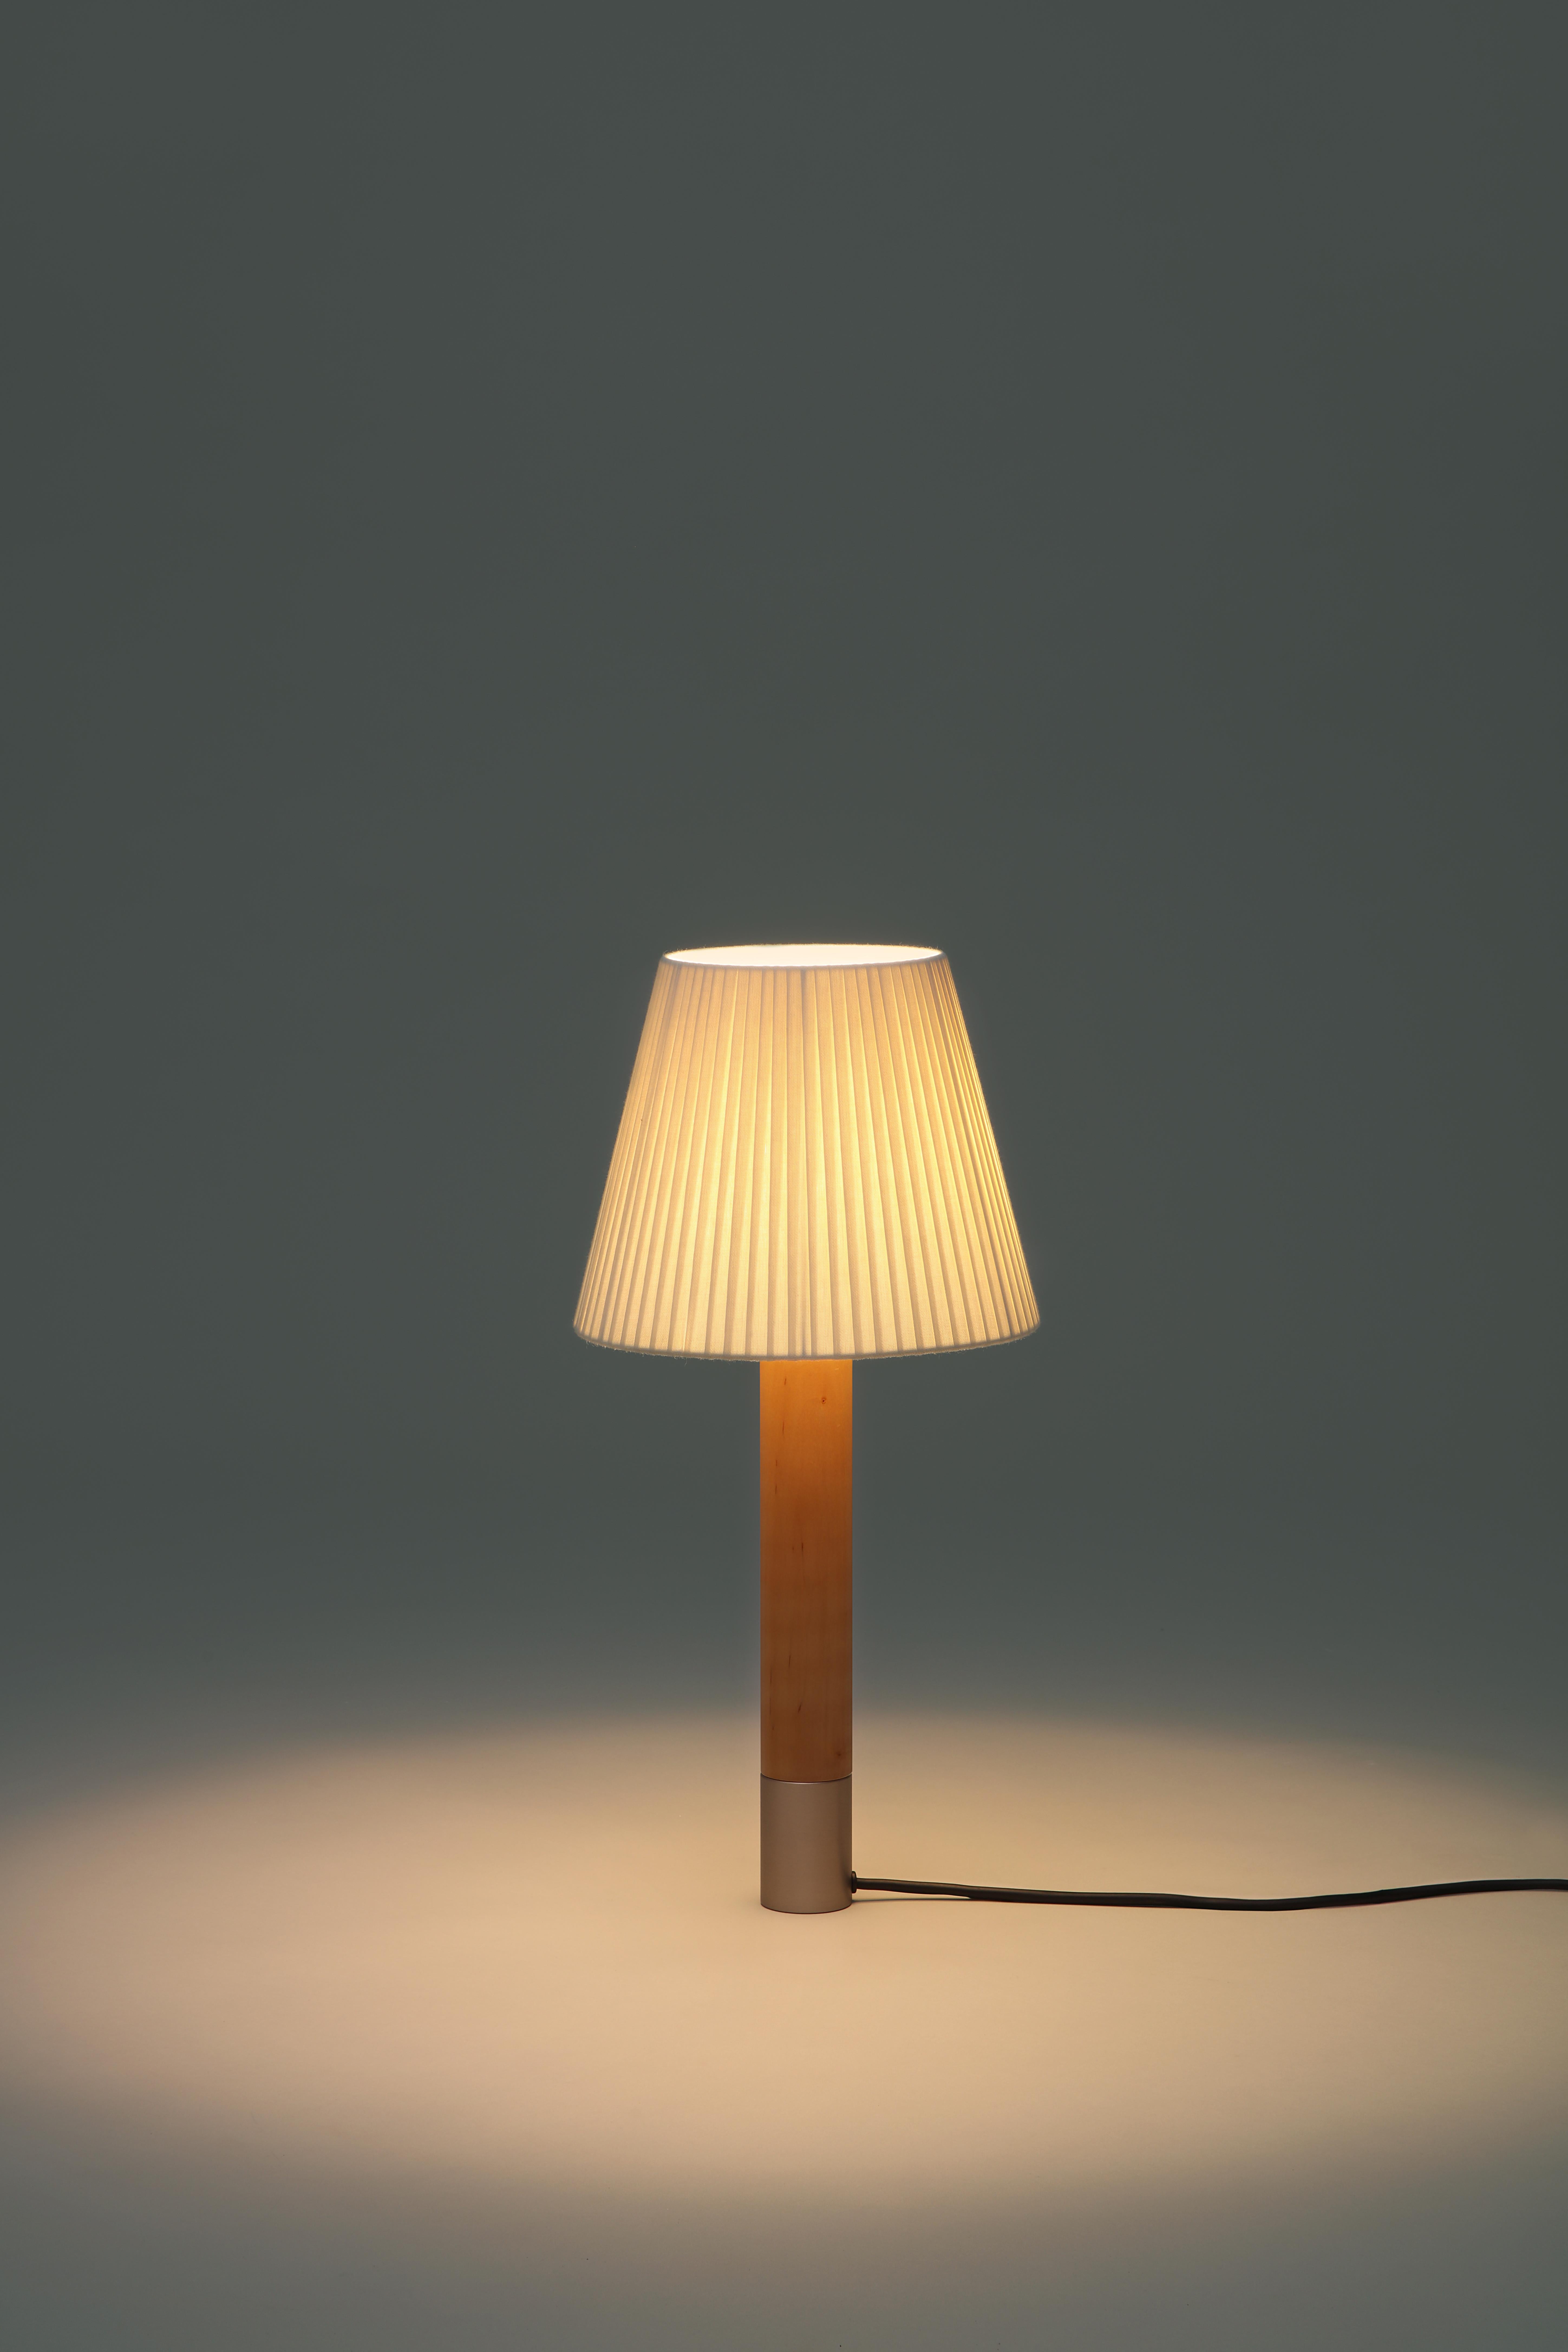 Spanish Bronze and Natural Básica M1 Table Lamp by Santiago Roqueta, Santa & Cole For Sale